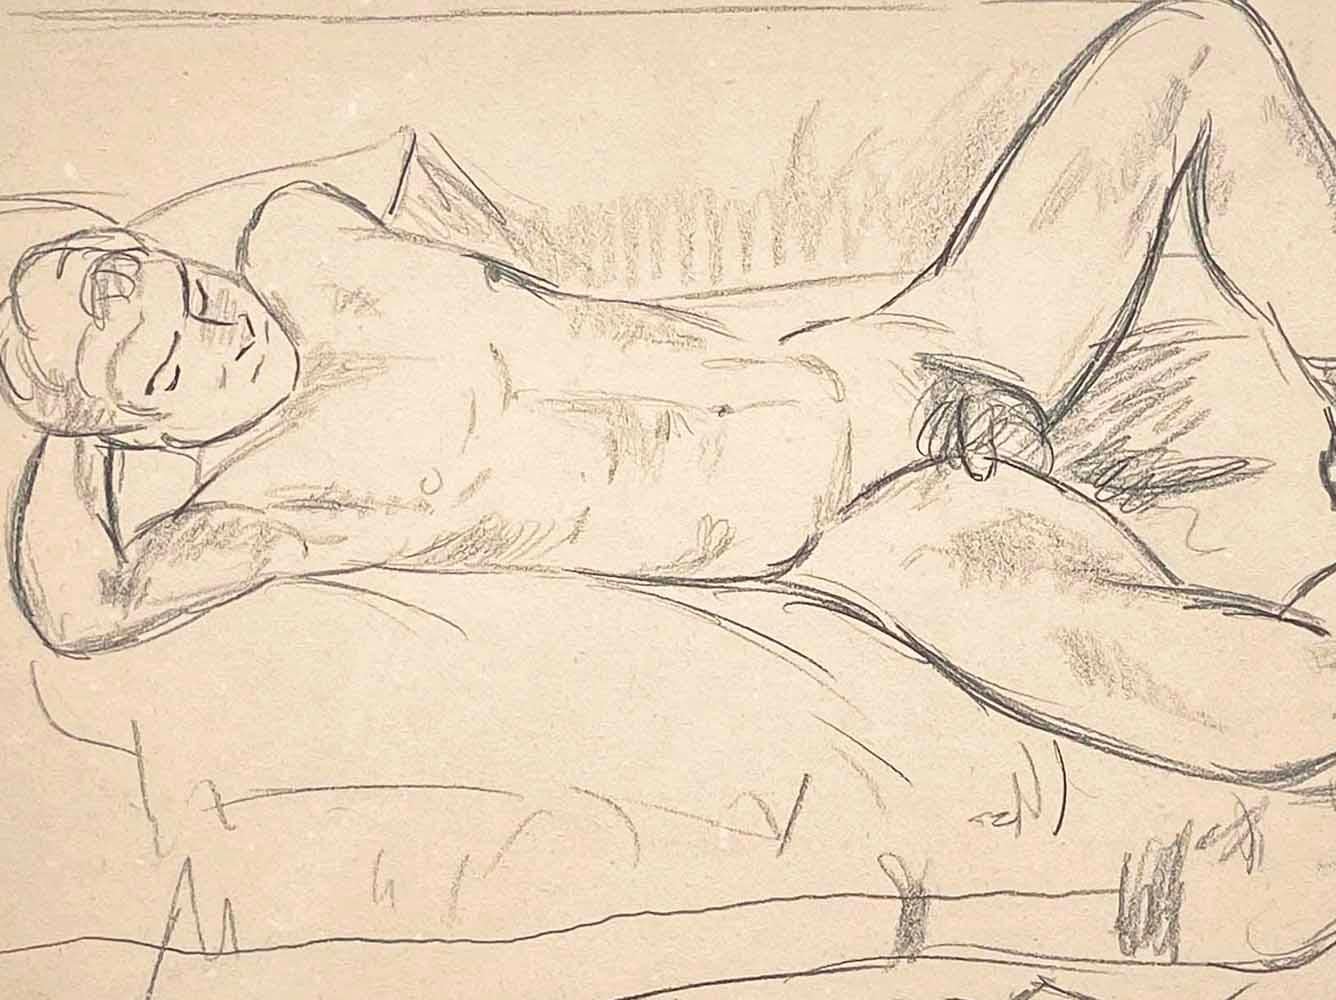 This important, beautifully rendered drawing of a reclining male nude figure was made by Edward Wolfe, who was born in South Africa but spent much of his career in Great Britain in the company of Duncan Grant and other celebrated gay artists.  A